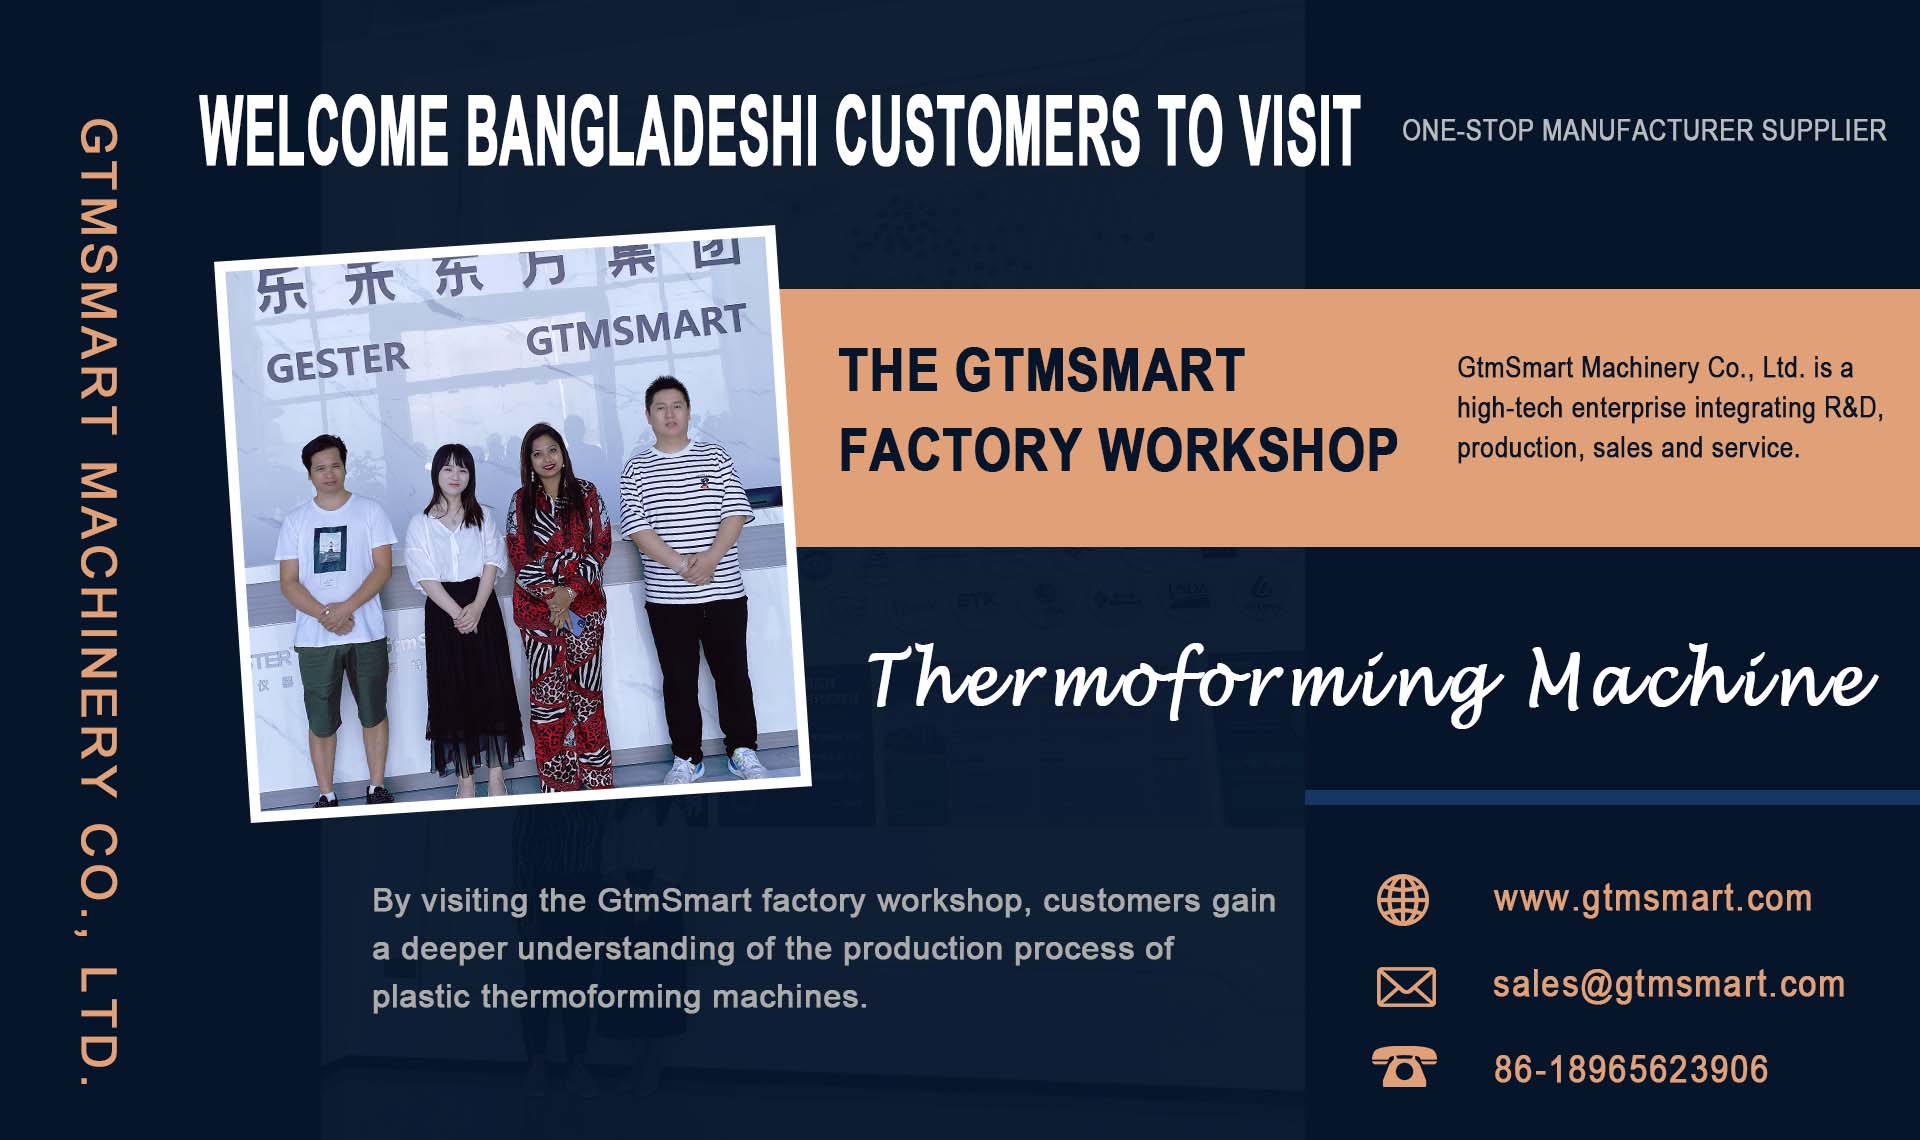 Welcome Bangladeshi Customers to Visit The GtmSmart Factory Workshop